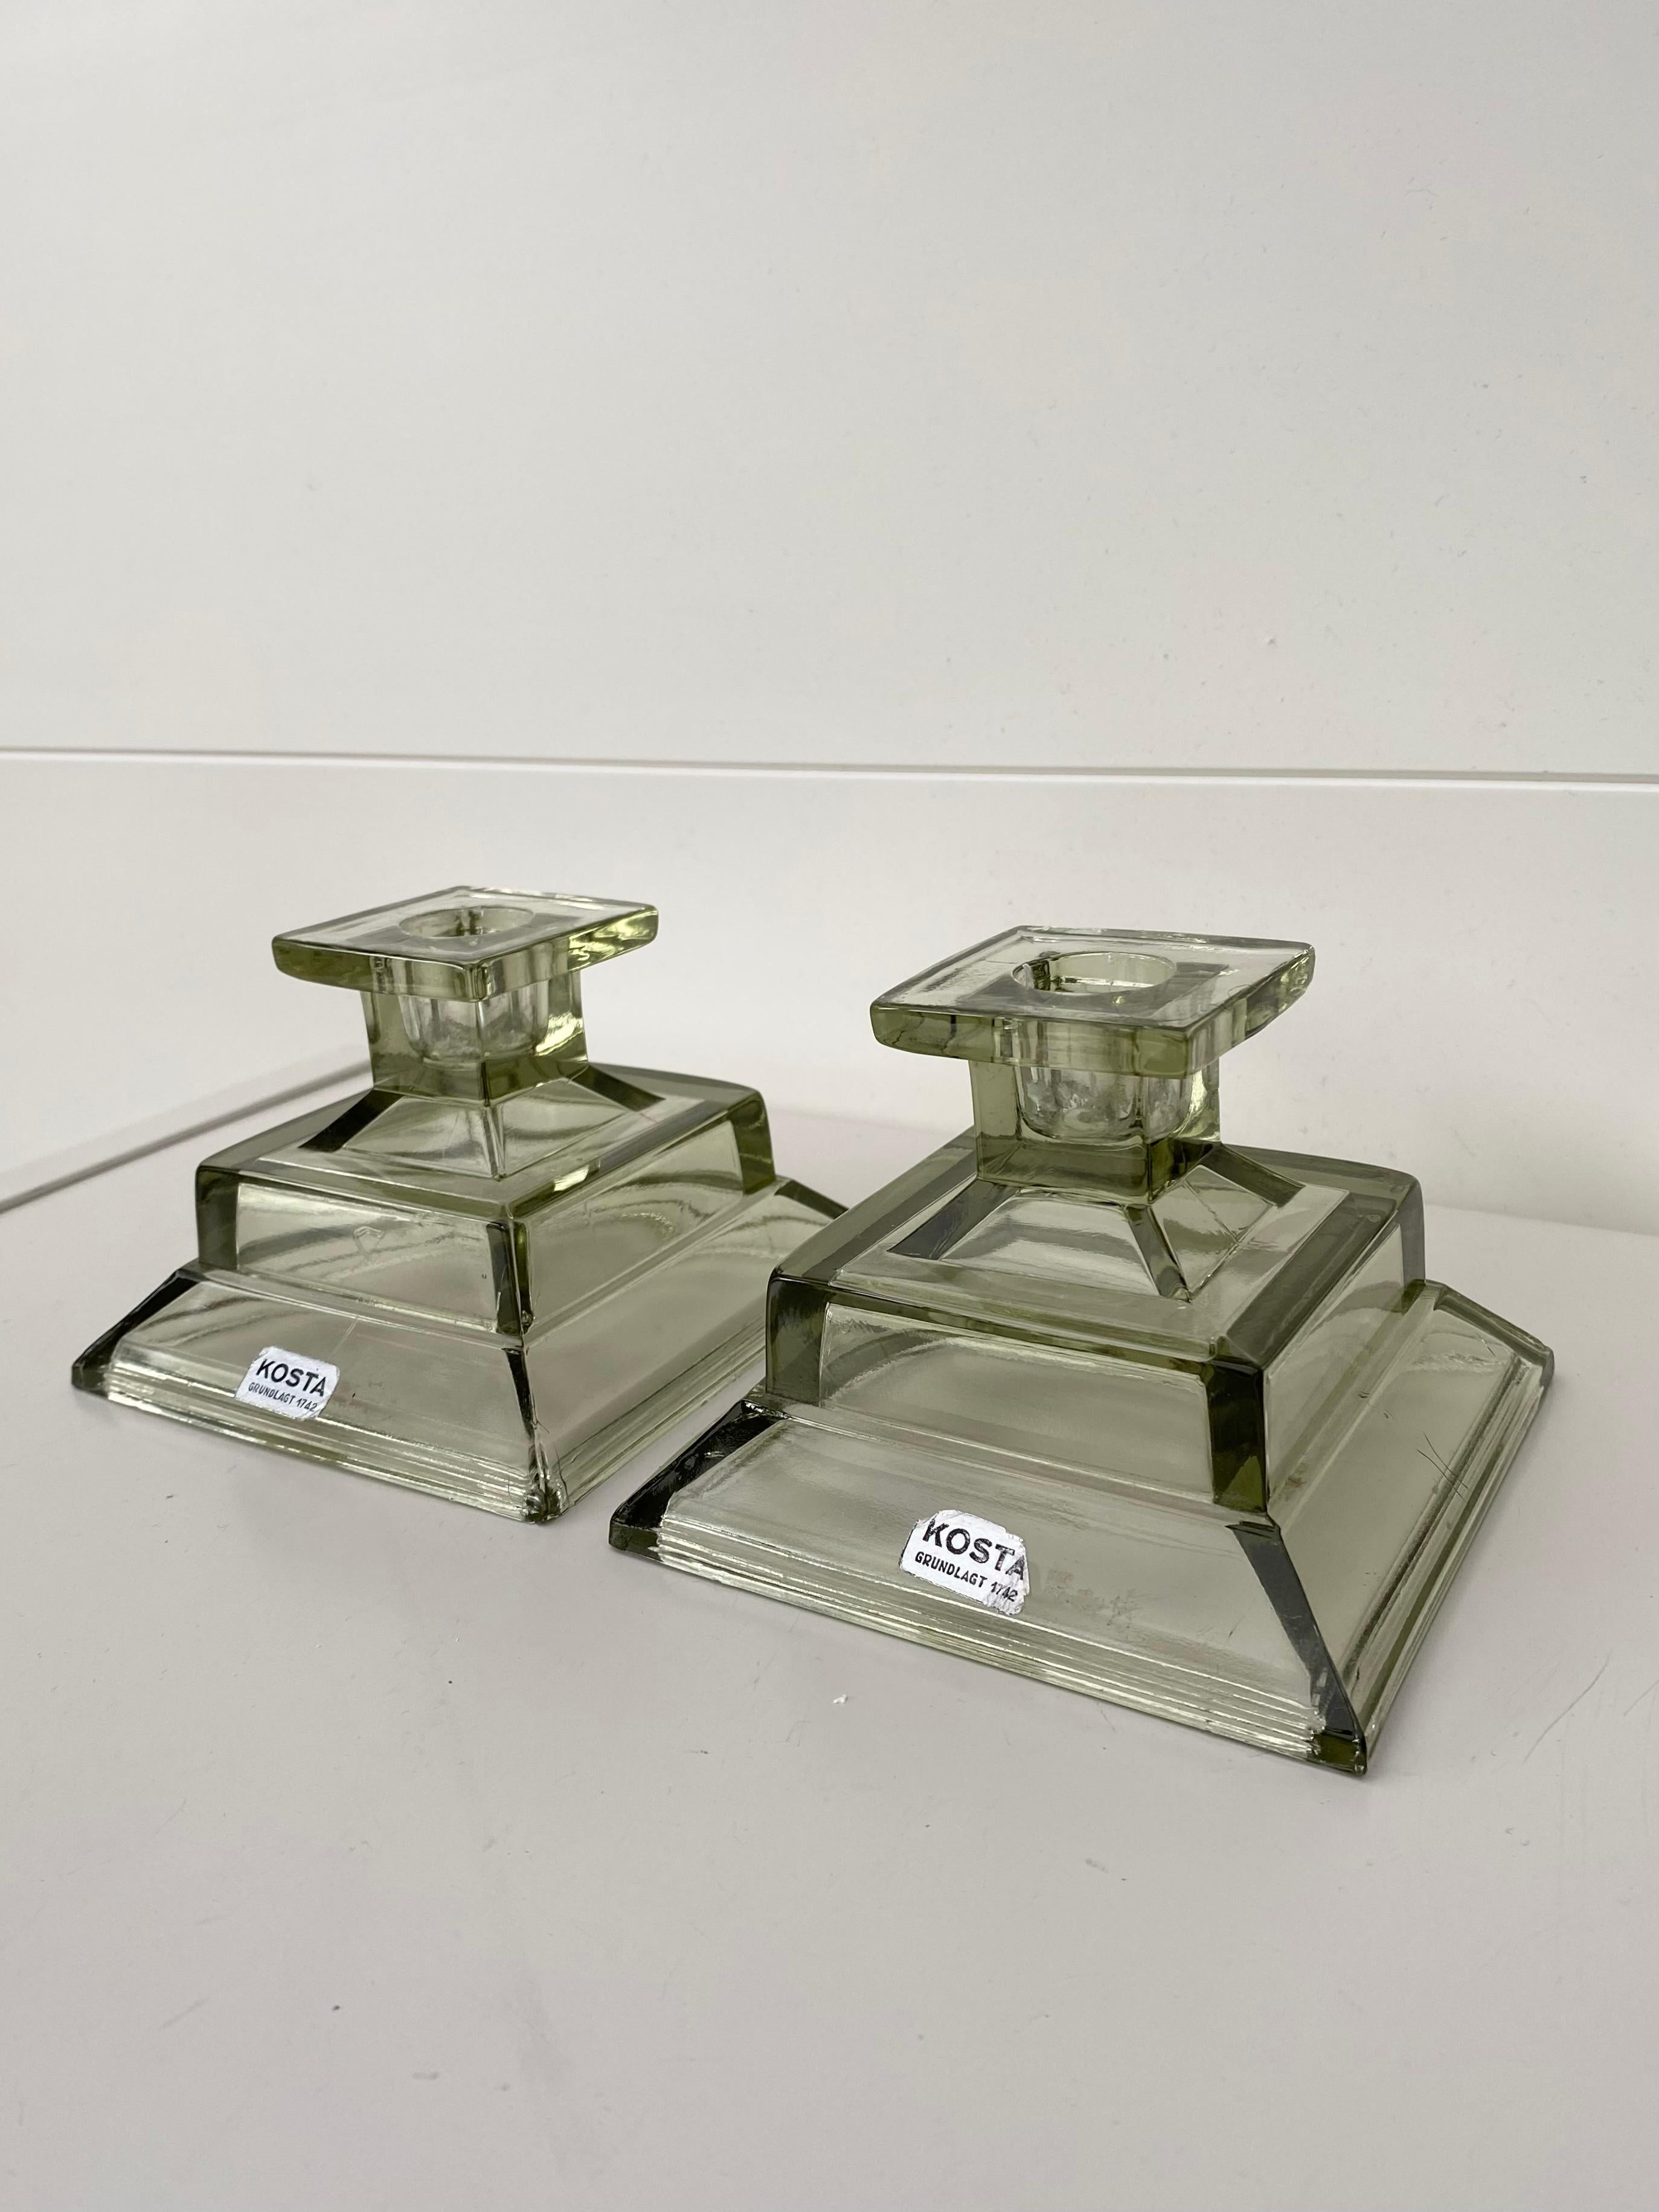 Pair of two smoked Glass candlesticks, manufactured by Kosta Glasbruk which was founded in 1742 and later became Kosta Boda Sweden. Signed with a sticker ‘Kosta Grundlagt 1742’. Appearance greenish / grayish. Remain in Good condition with wear